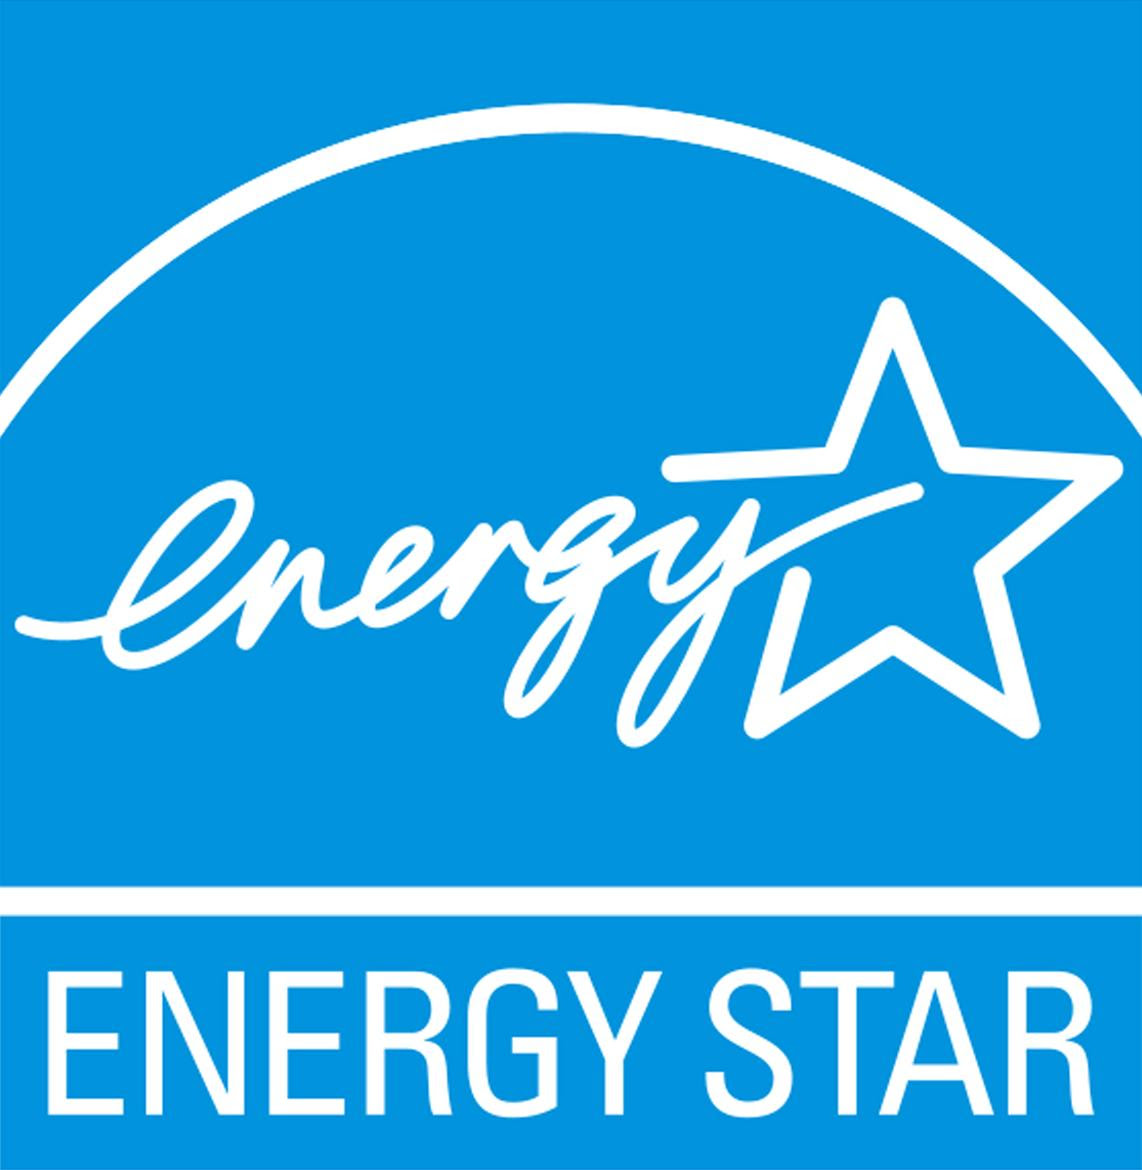 There is an ENERGY STAR Tax Holiday this weekend.